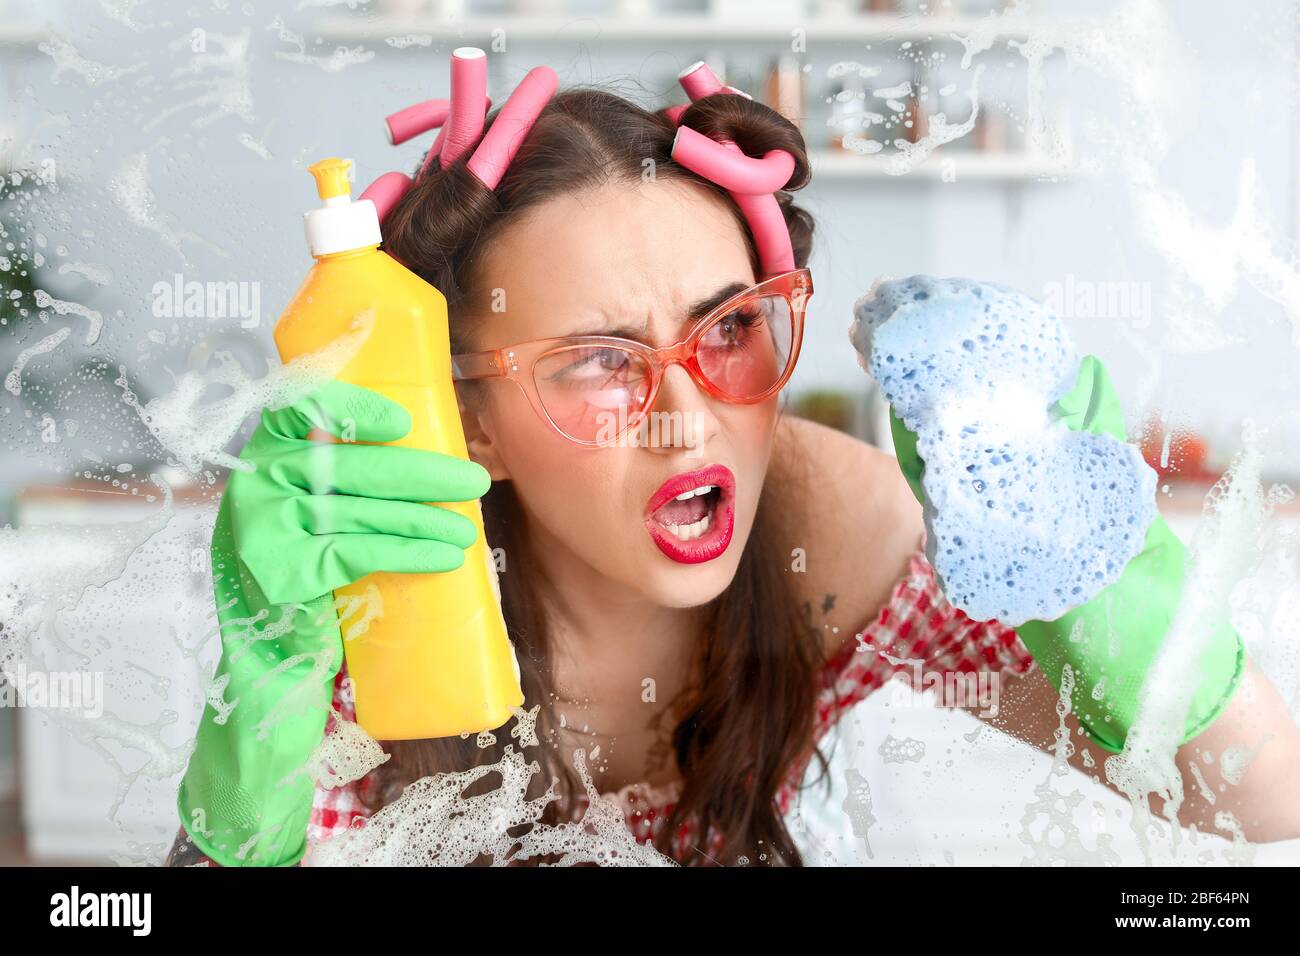 Funny angry housewife cleaning kitchen window Stock Photo - Alamy